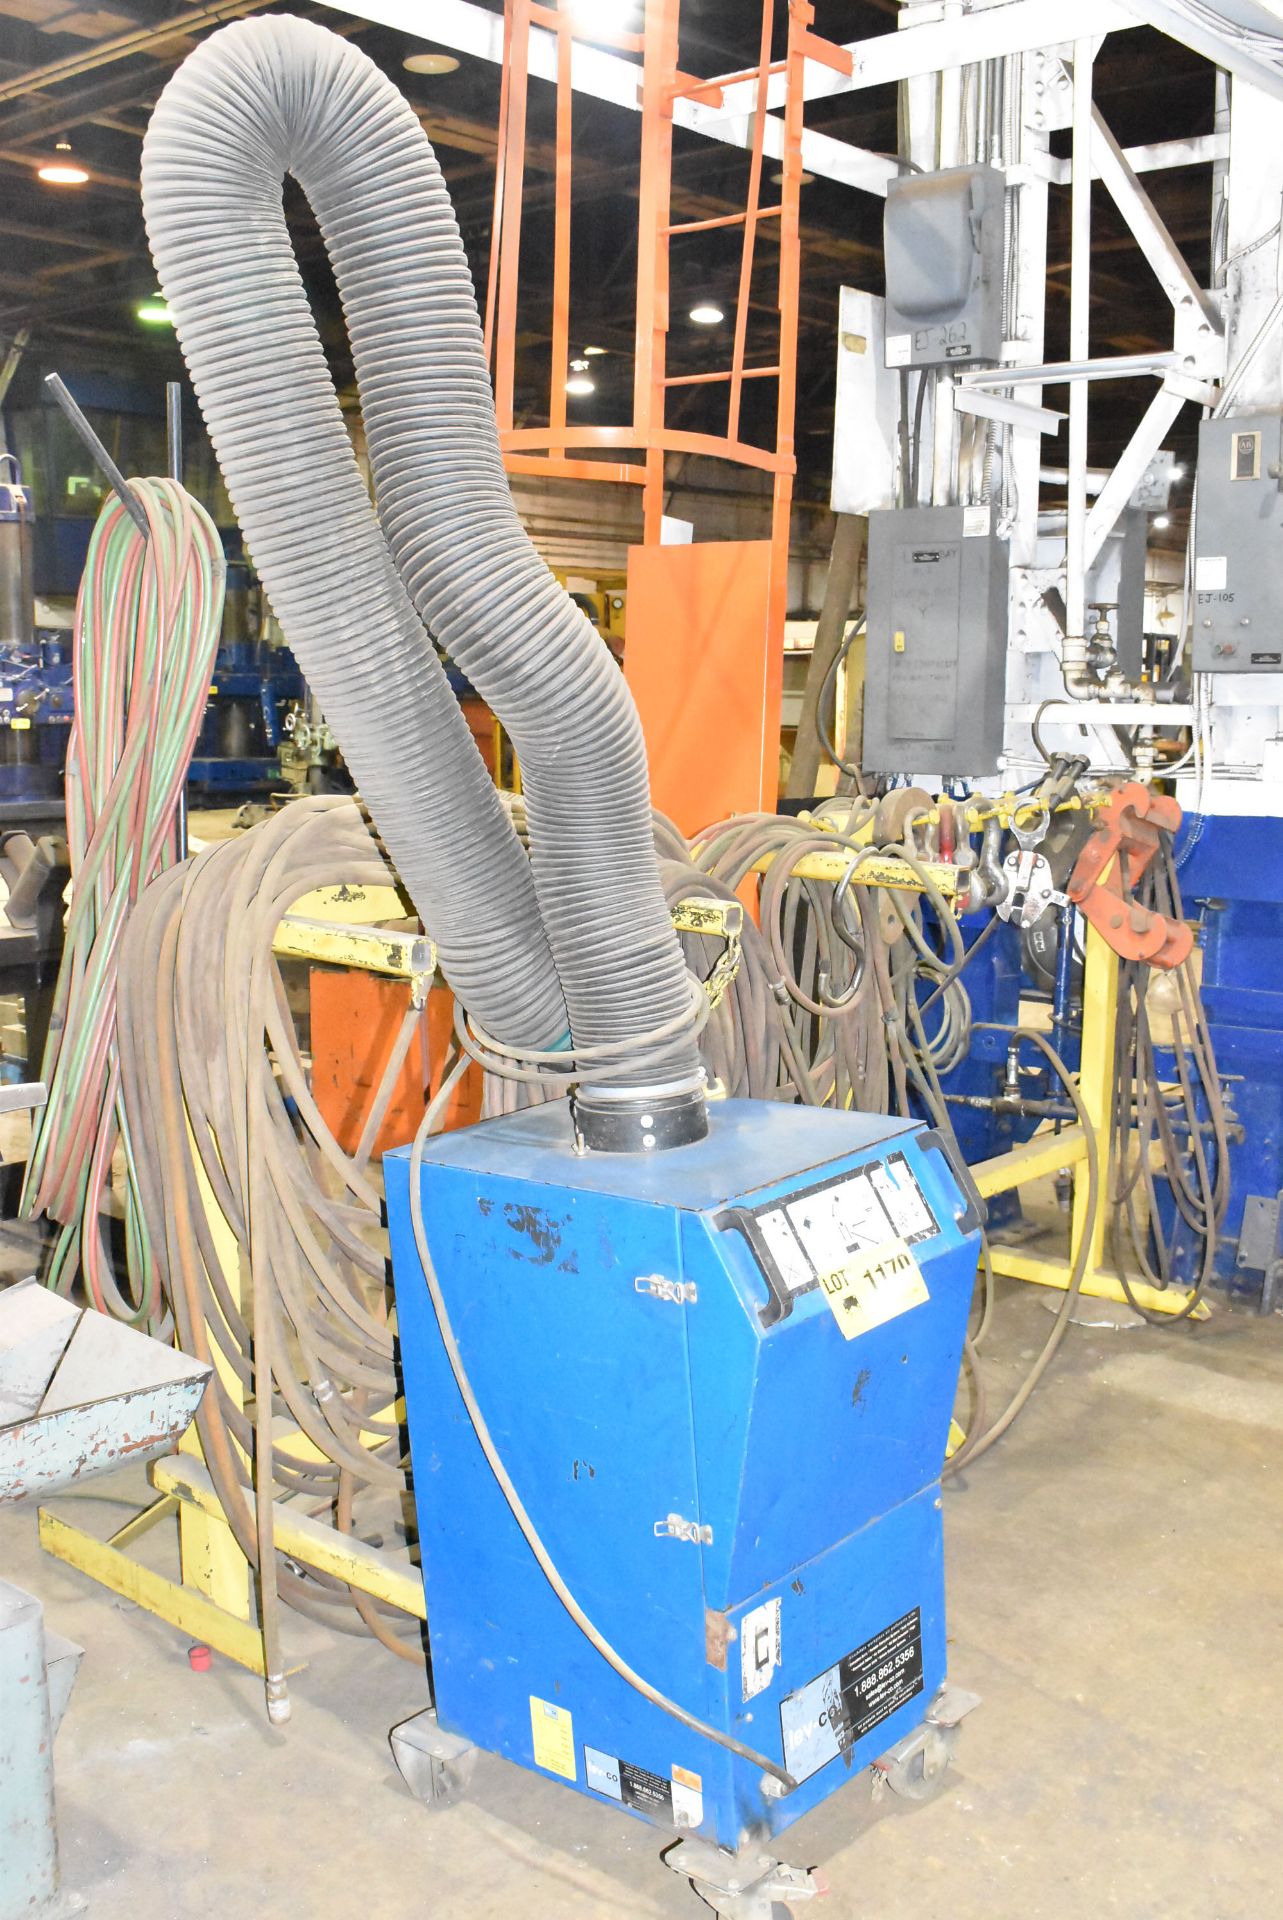 LEV-CO PORTABLE WELDING FUME EXTRACTOR WITH OVERHEAD SNORKEL-TYPE EXTRACTION ARM, S/N: N/A [ - Image 2 of 3